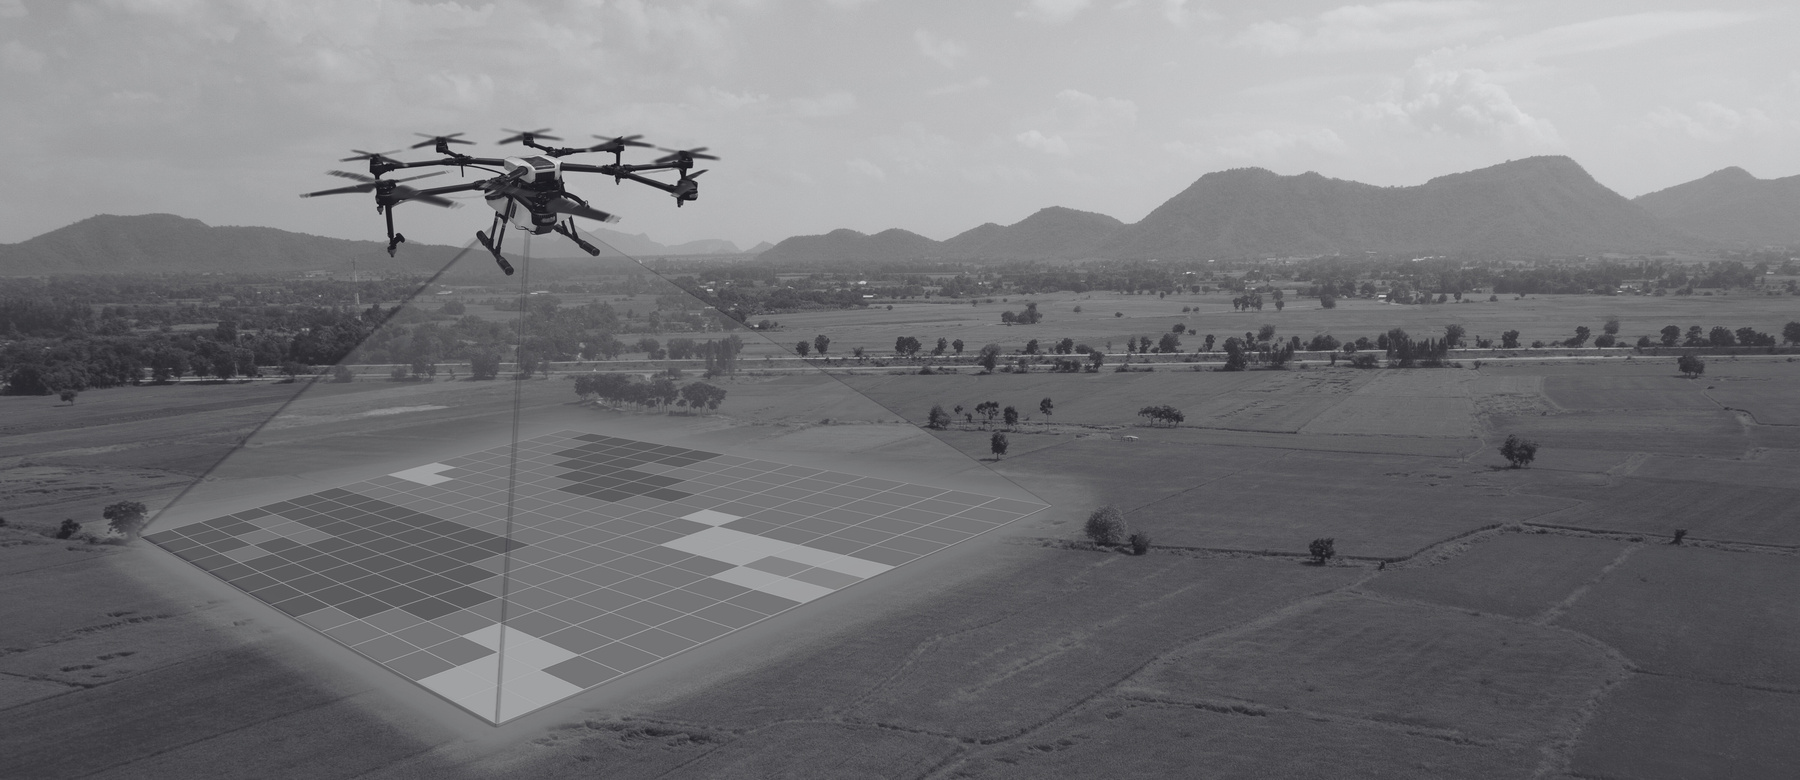 a black and white image of a drone flying over a field